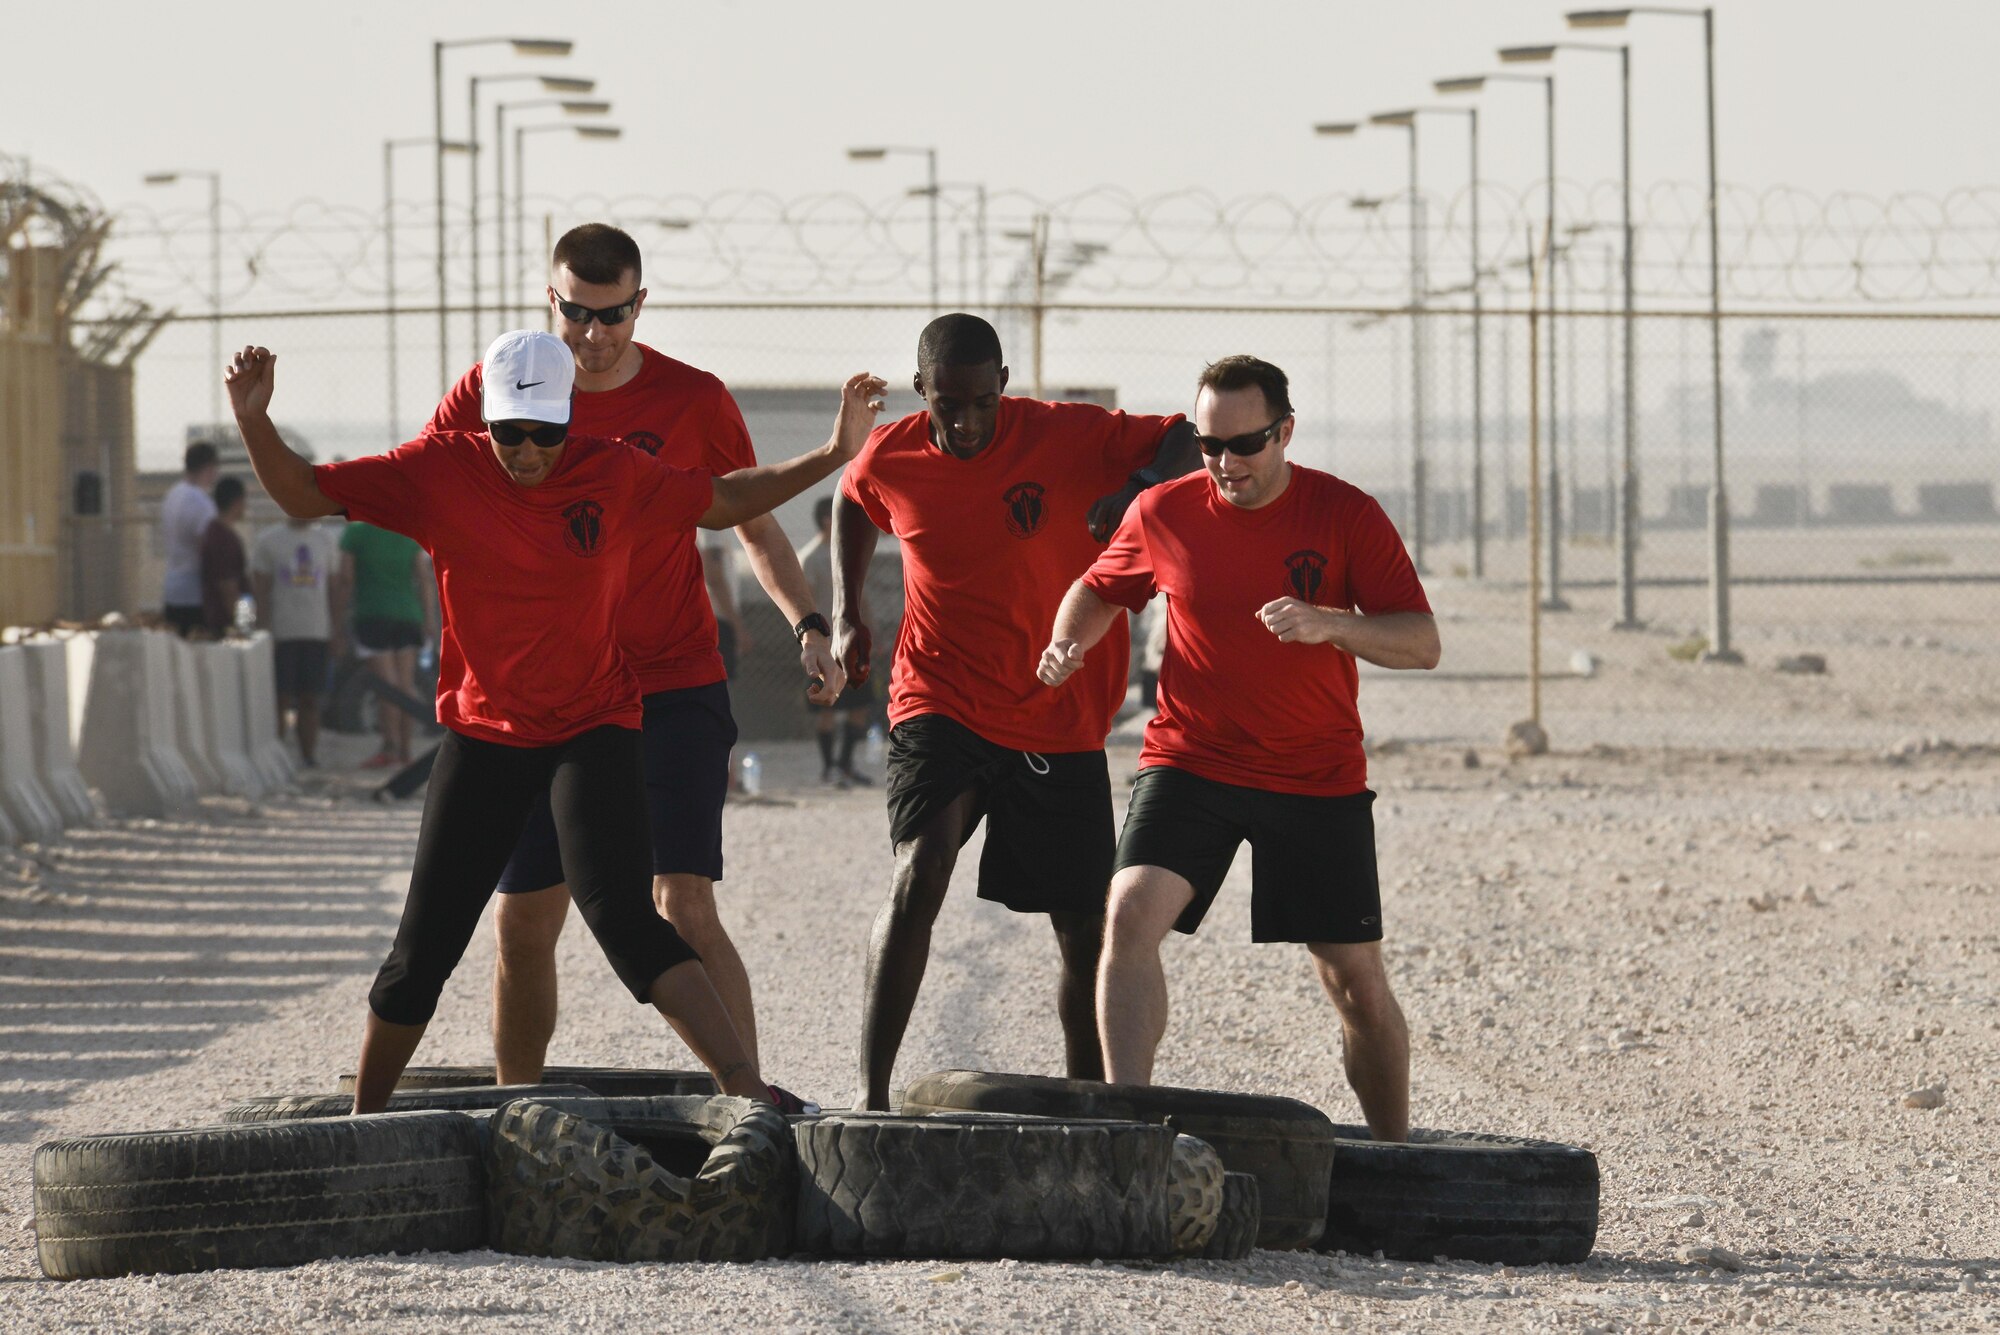 Participants step through the tire obstacle during a Diversity Day mud run September 20, 2015 at Al Udeid Air Base, Qatar.  The mud run challenged 106 runners with a two mile course that contained several obstacles from low crawling, T-wall climbing, barrier hurdles, and a Ôdeep freezeÕ cold mud pool. The event was held to help spread the word of Diversity Day, an initiative started by the Department of Defense for diversity events held throughout the year. (U.S. Air Force photo/ Staff Sgt. Alexandre Montes)  